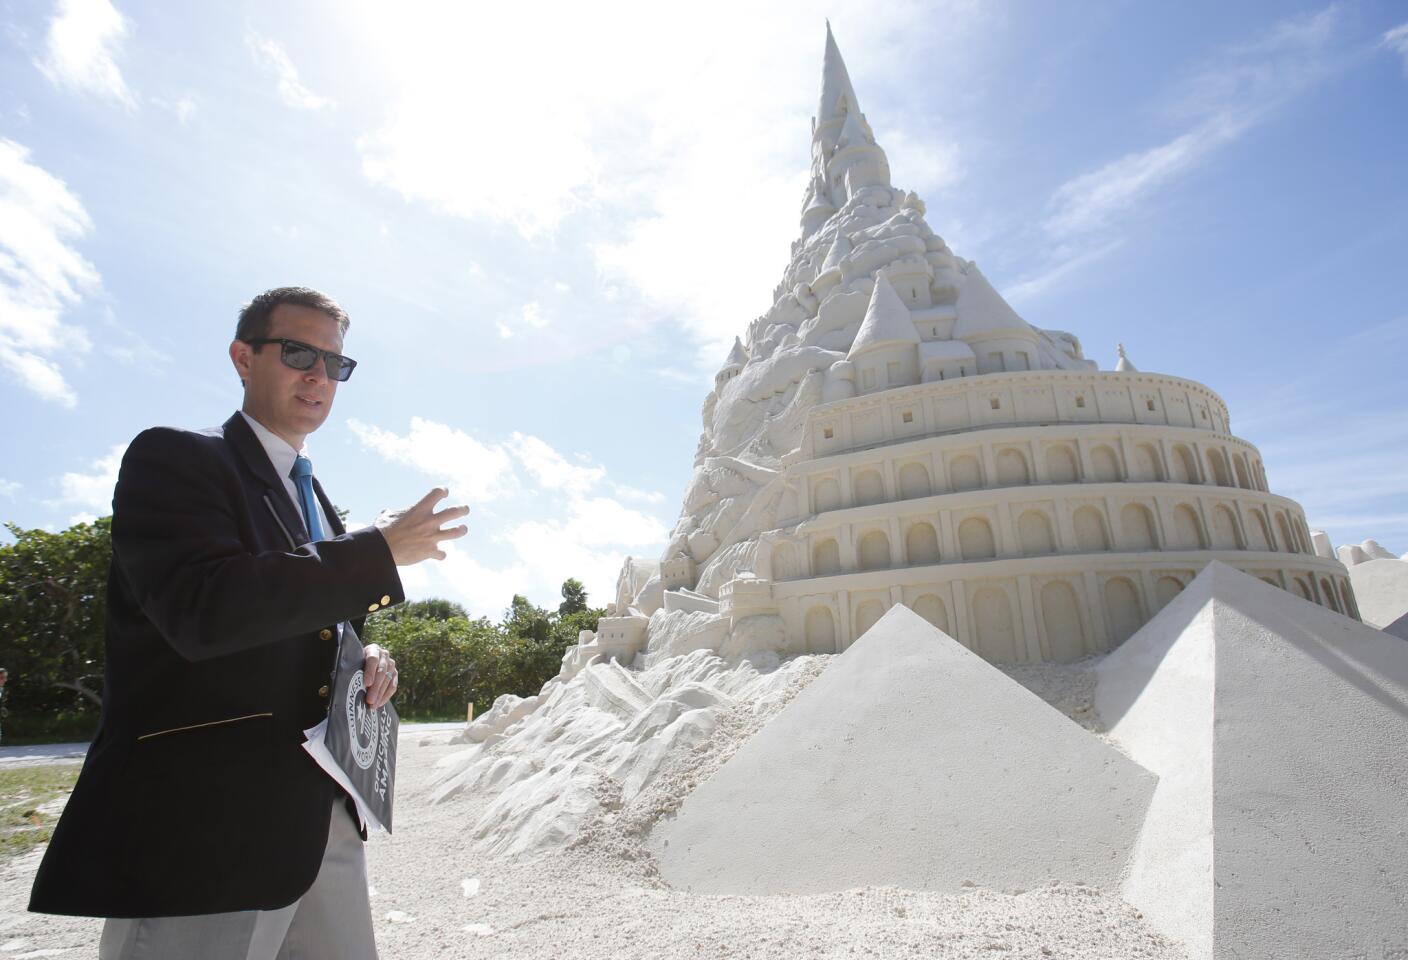 Guinness World Records Limited adjudicator Philip Robertson explains the criteria needed for a record attempt to build the tallest sand castle in 2015 on Virginia Key Beach in Miami. The castle, which was commissioned by Turkish Airlines to highlight their new nonstop service from Miami to Istanbul, rises to a height of 45 ft. 10.25 in.